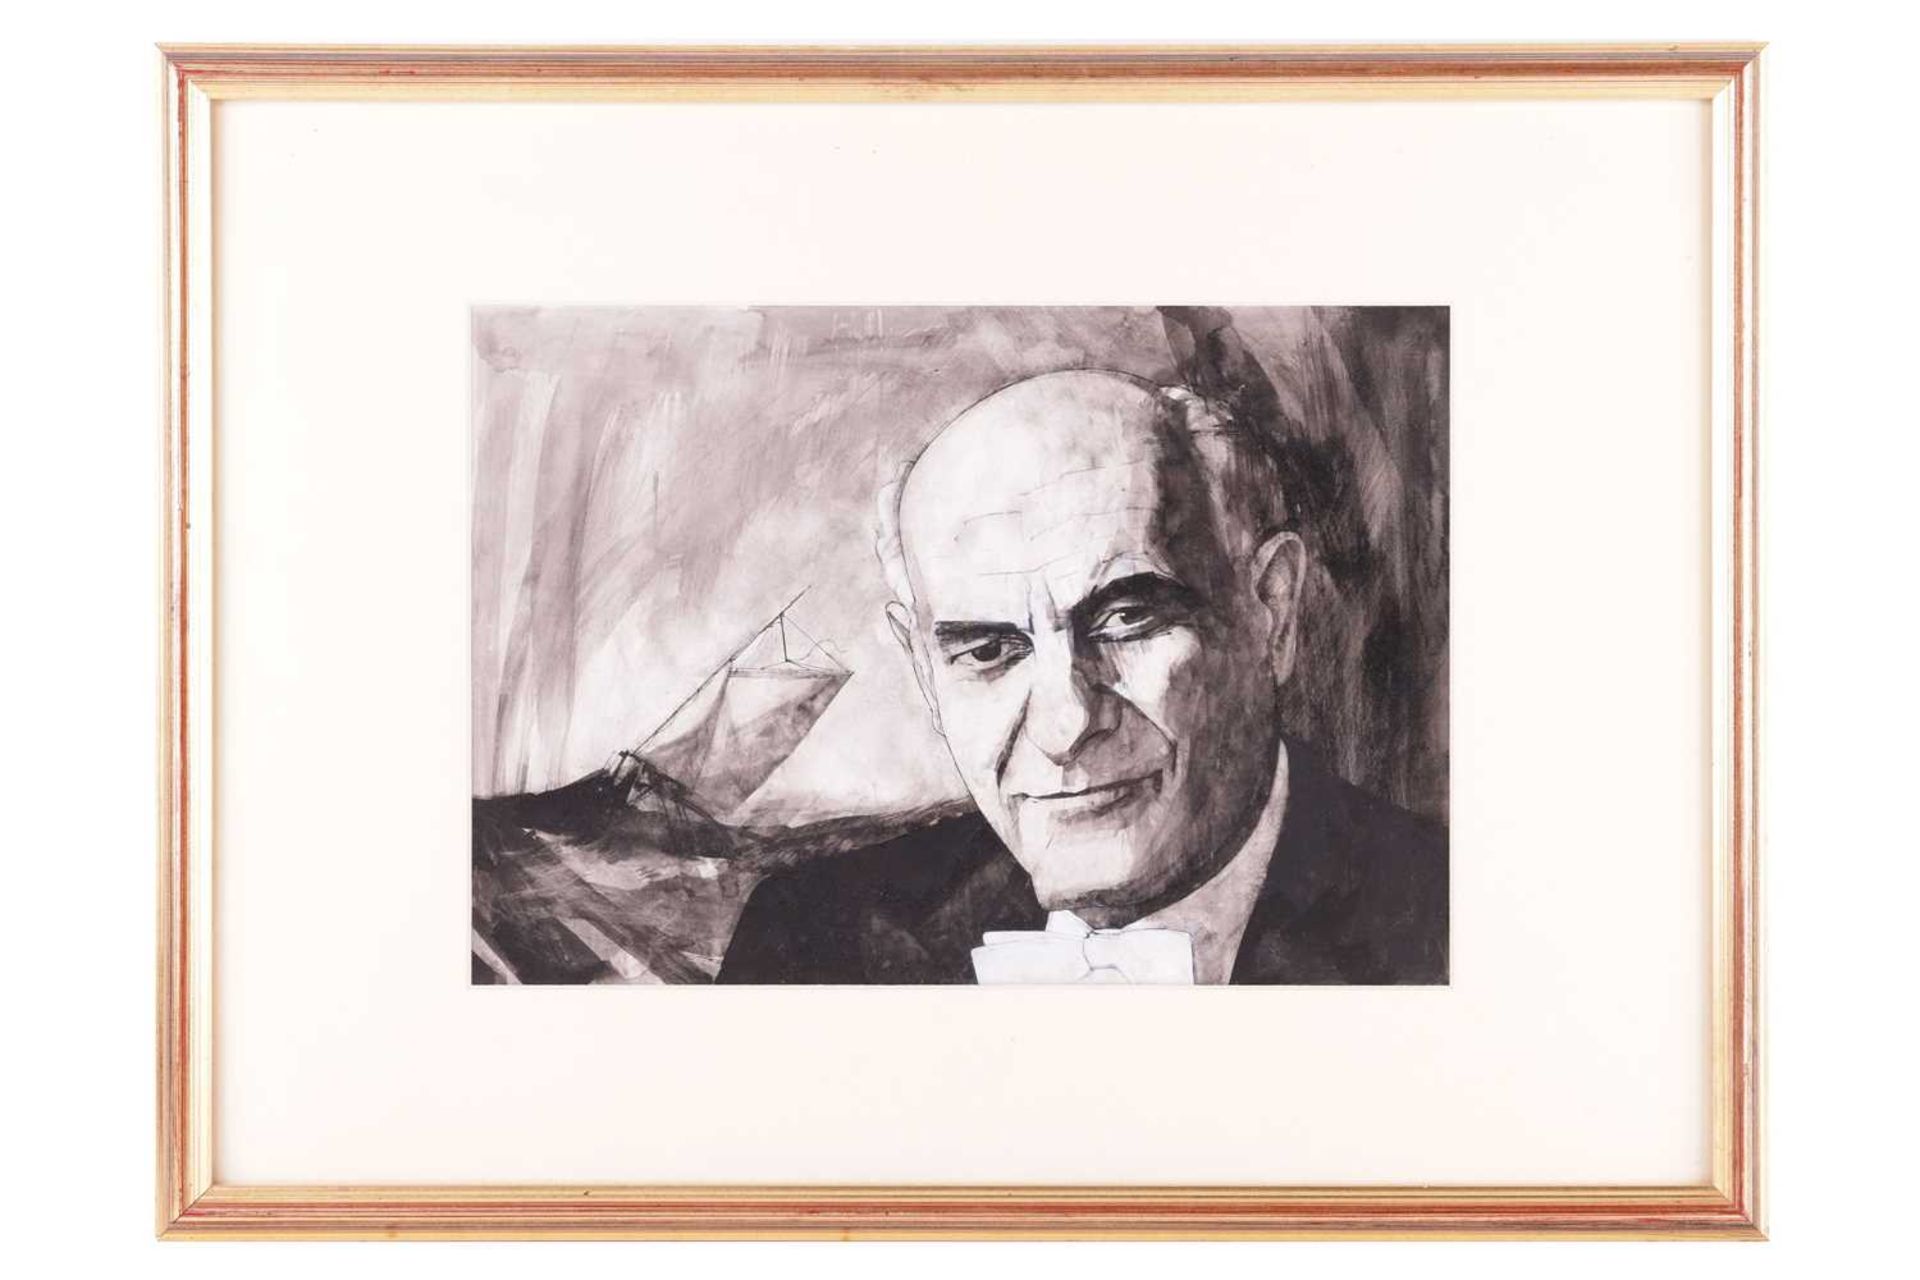 Barry Fantoni (b.1940), Portrait of Georg Solti, unsigned, pen and ink with bodycolour, 25 x 36 cm, 